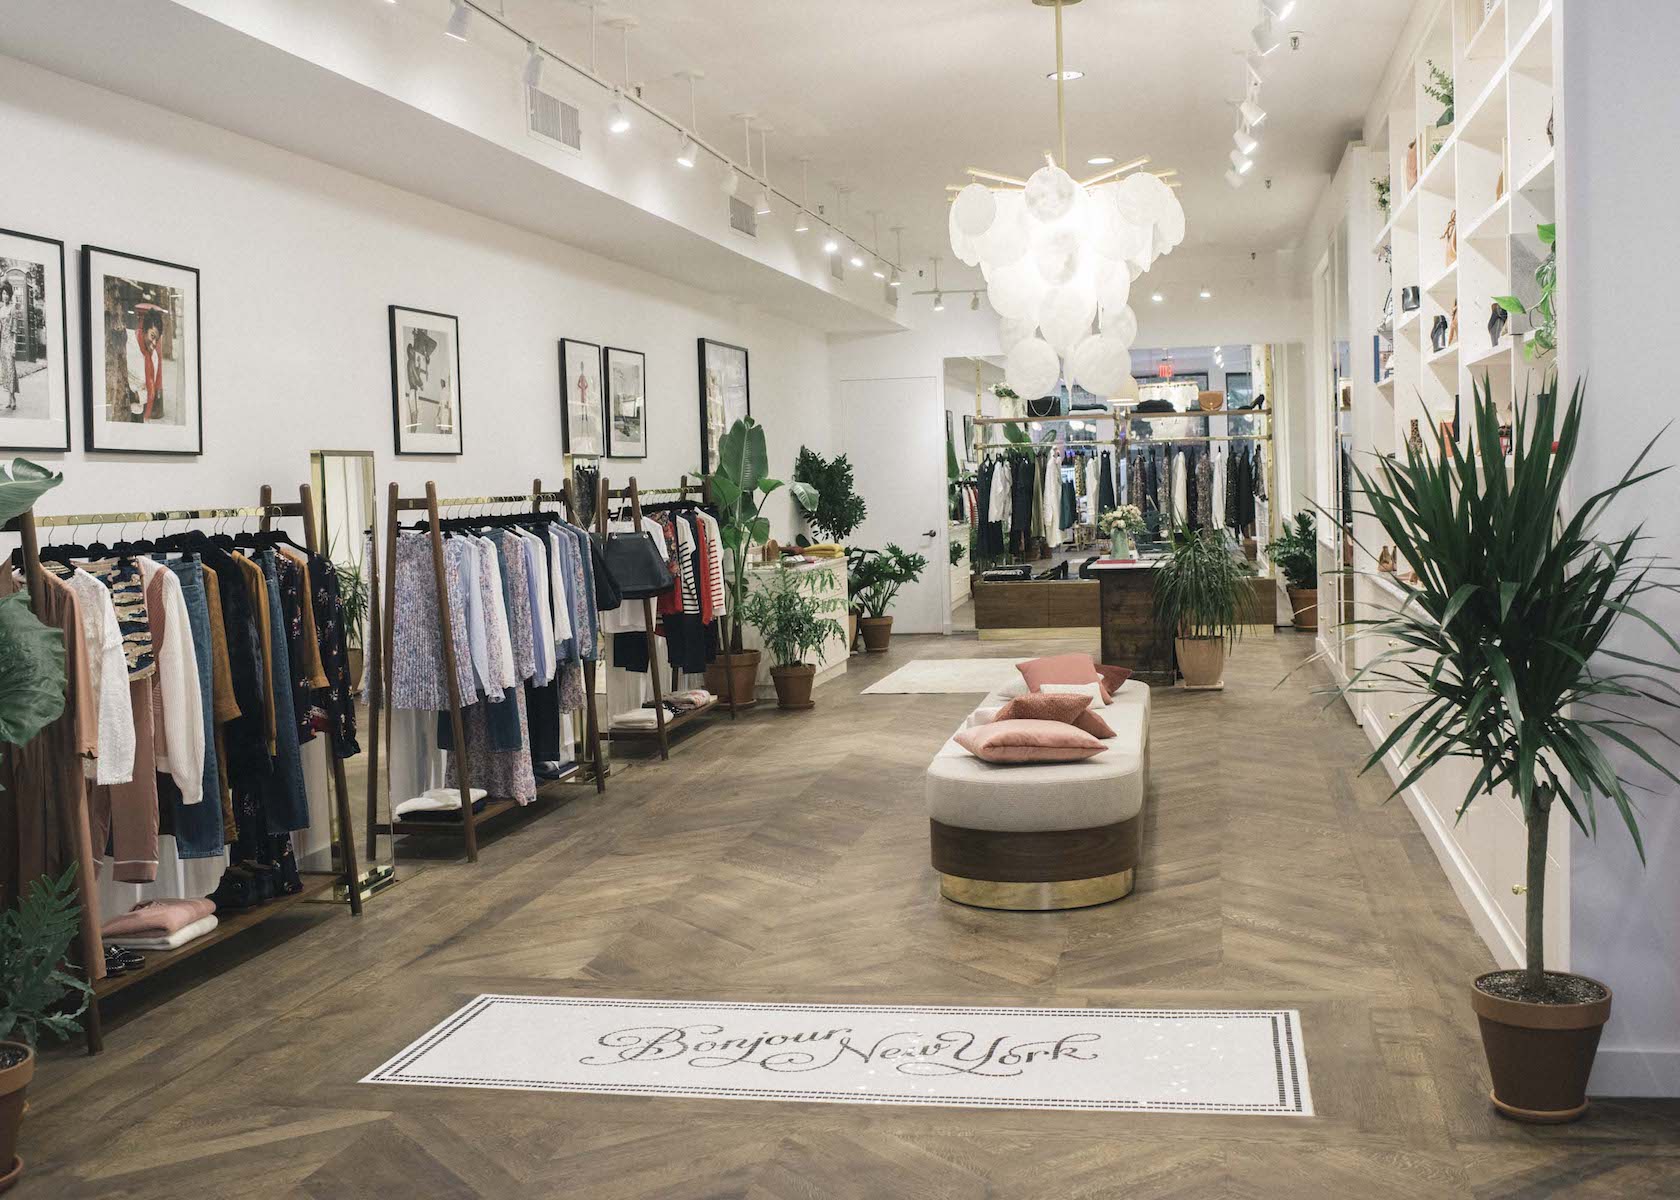 French Brand Sezane’s First US Flagship Store In Nolita